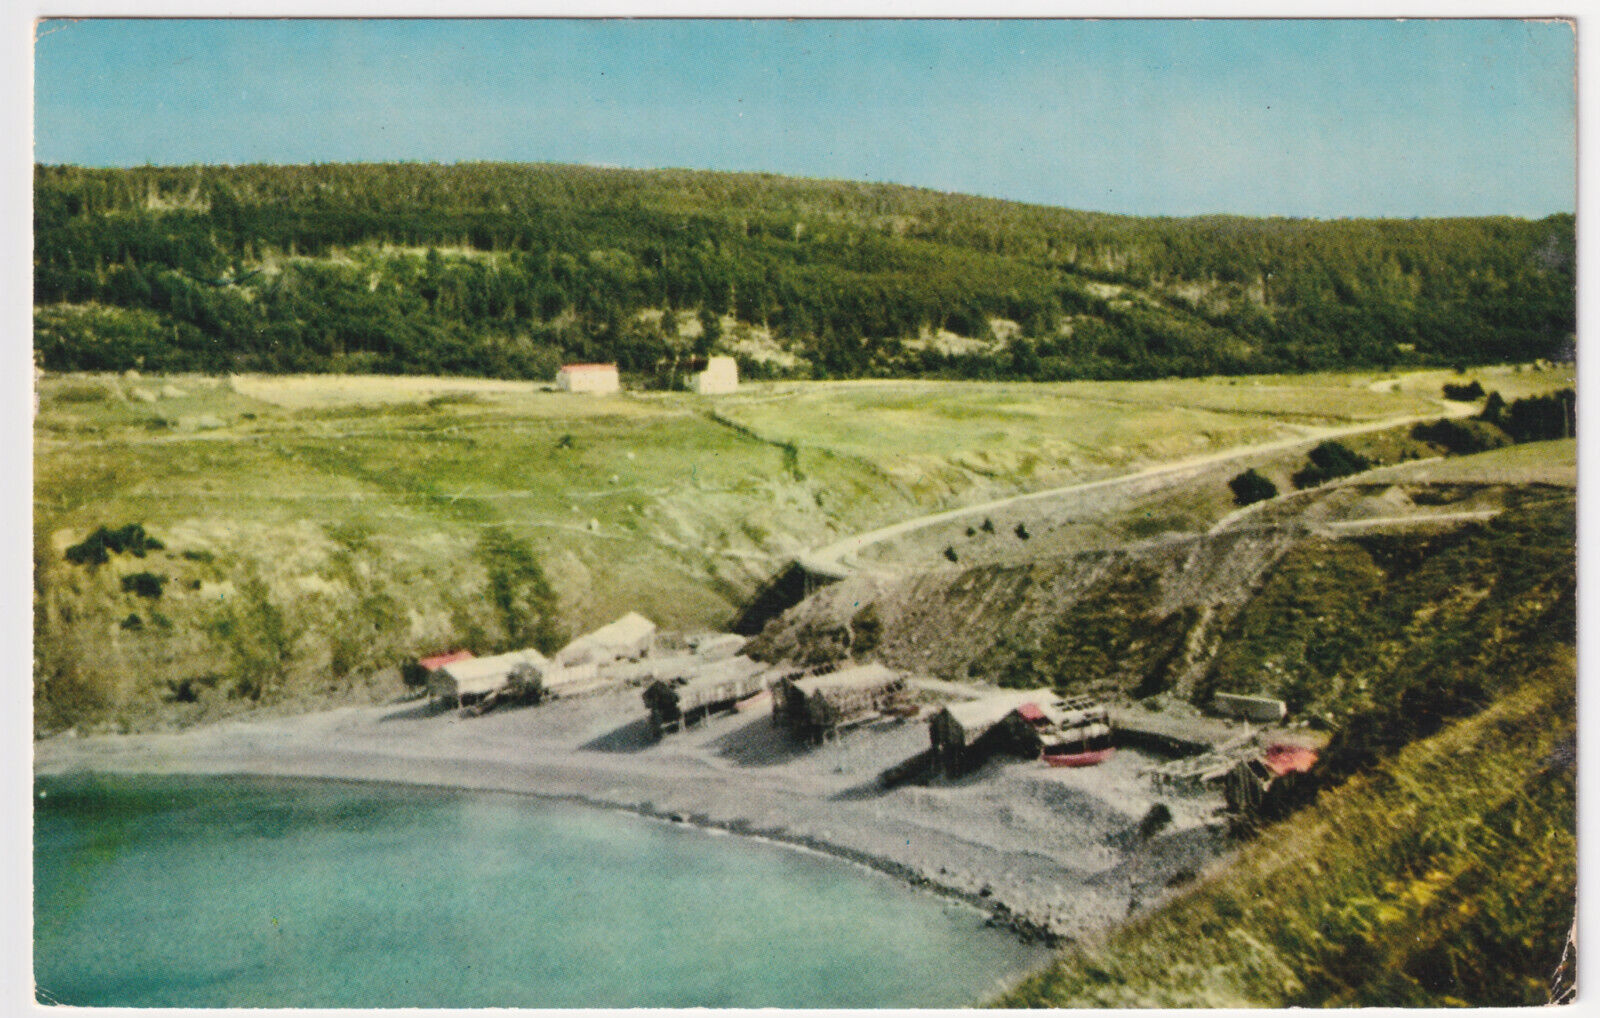 NEWFOUNDLAND LOGY BAY ON THE MARINE DRIVE POSTED 1960 TO MRS KABIN, OAKVILLE ON.